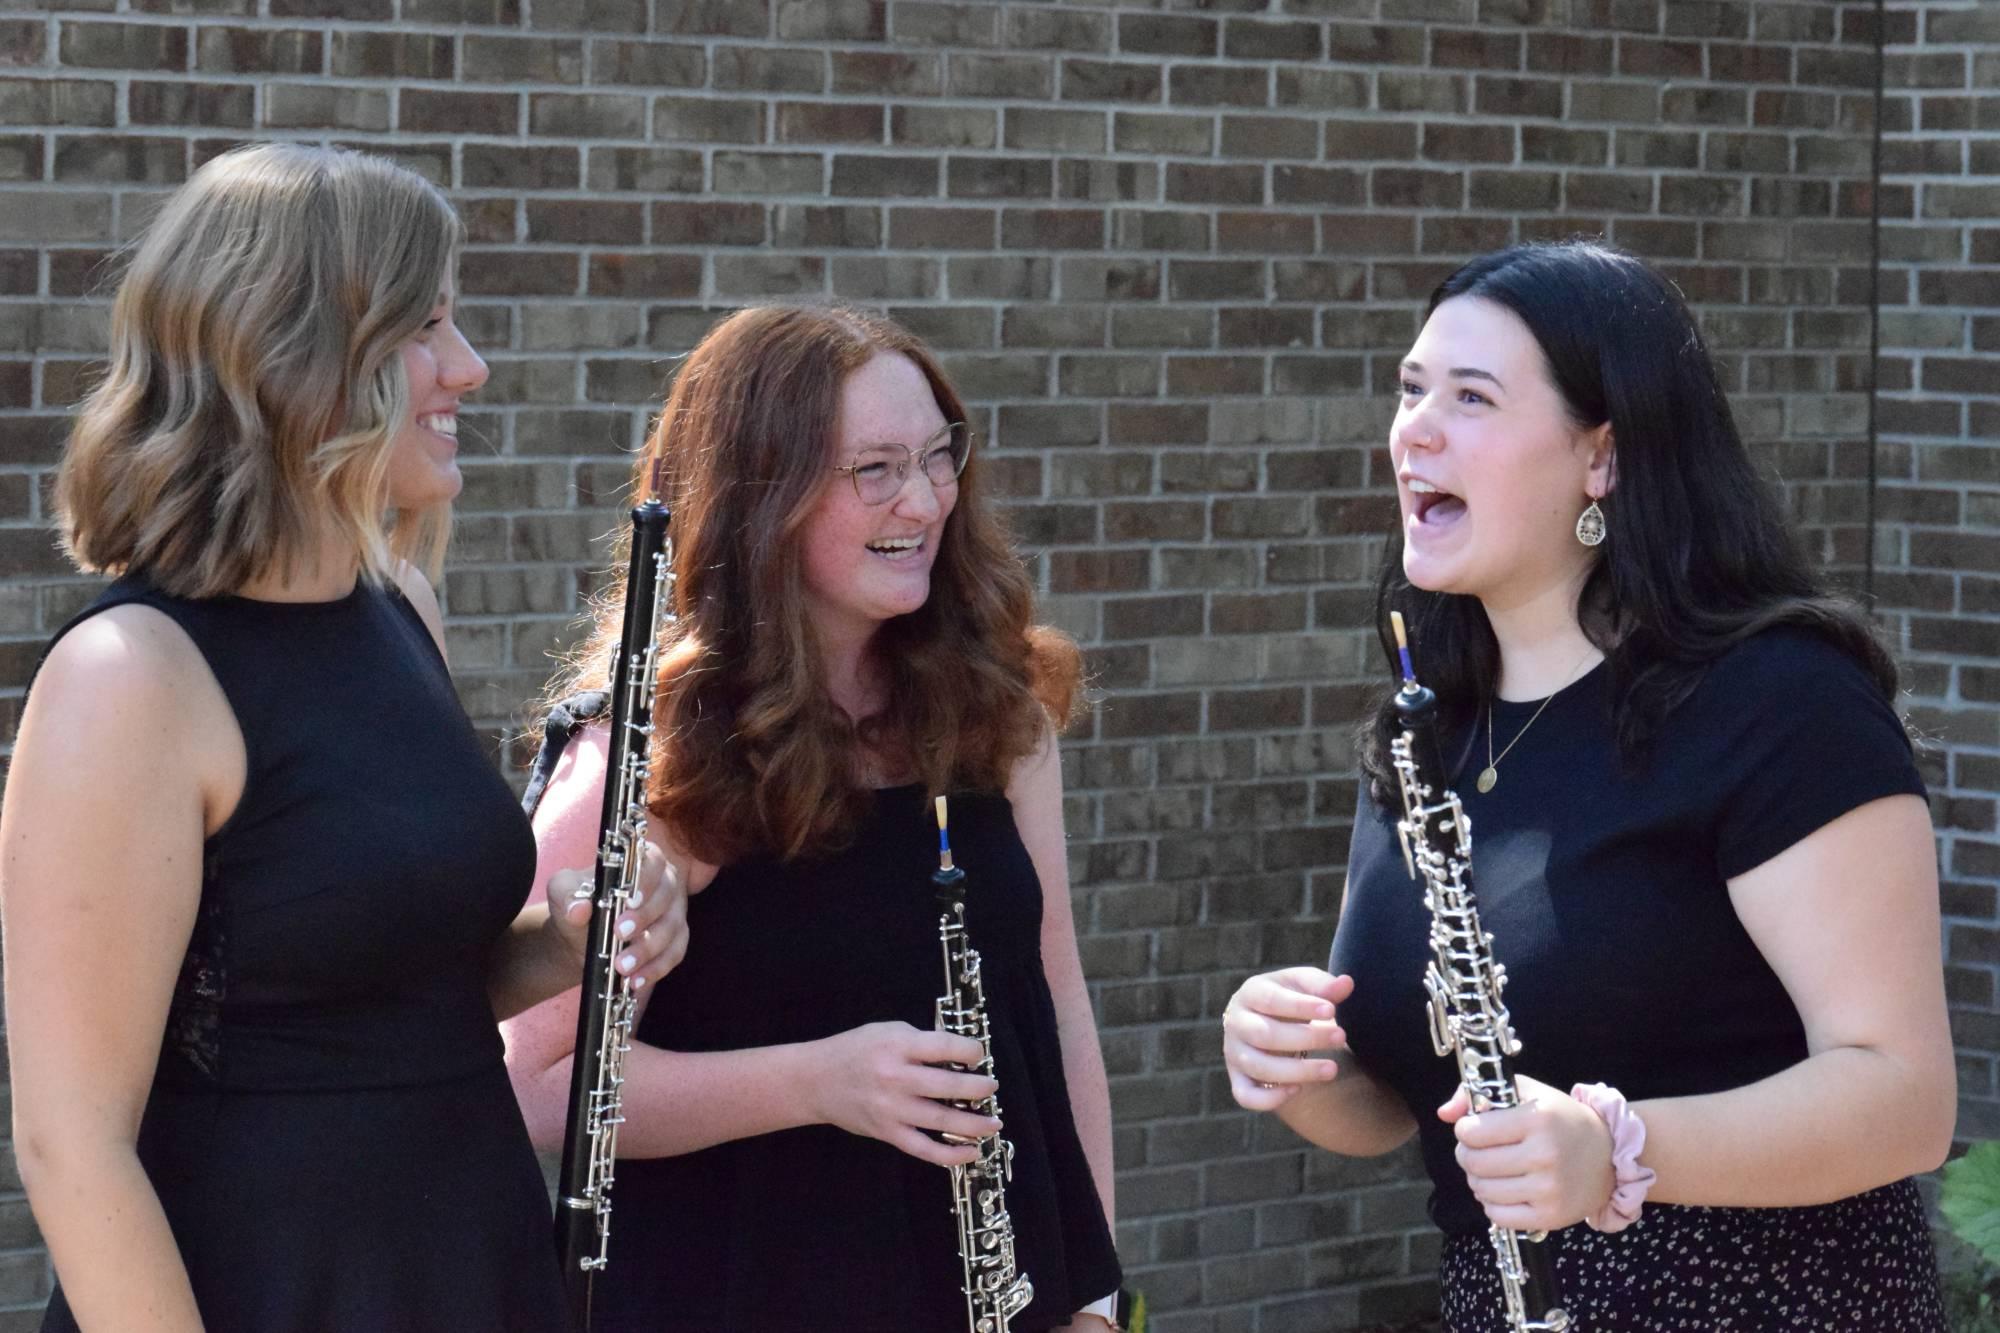 Lea卡特, 娜塔莉·克莱恩, and Natalie Feldpausch holding their oboes in the Marcia Haas garden at HCPA.